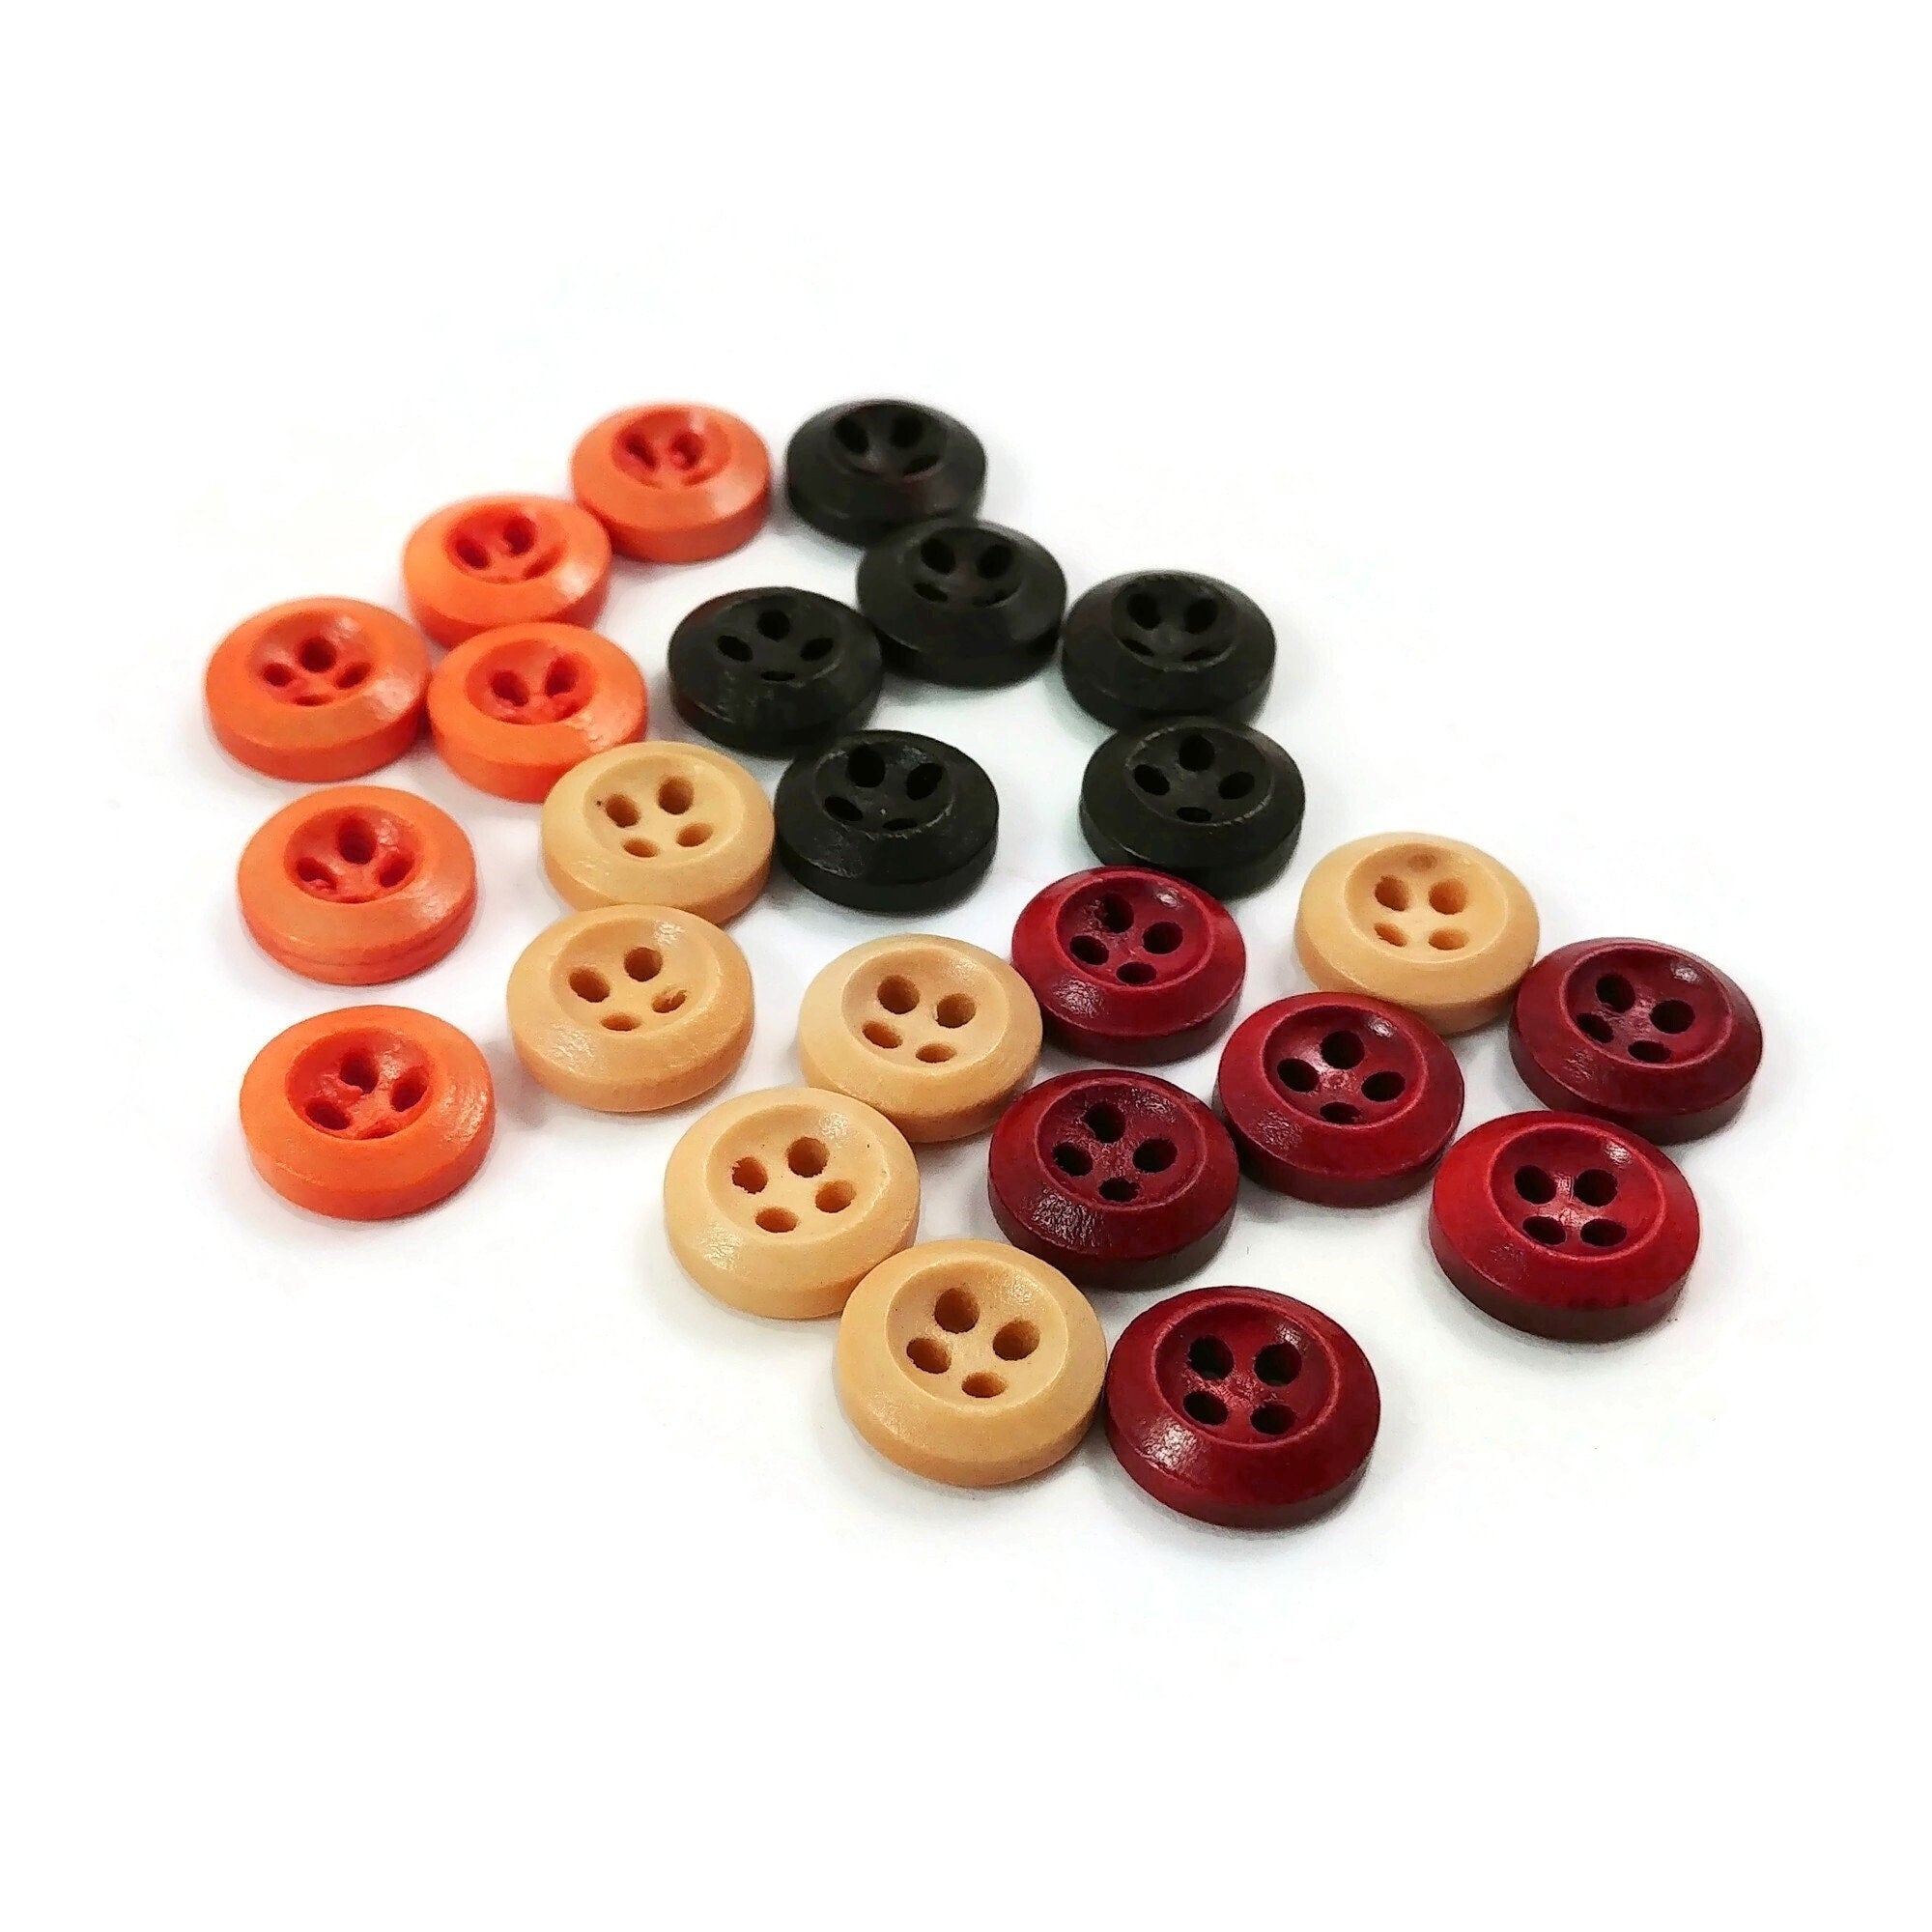 10mm tiny wooden buttons, 6 small natural buttons, Cute mini buttons for dolls